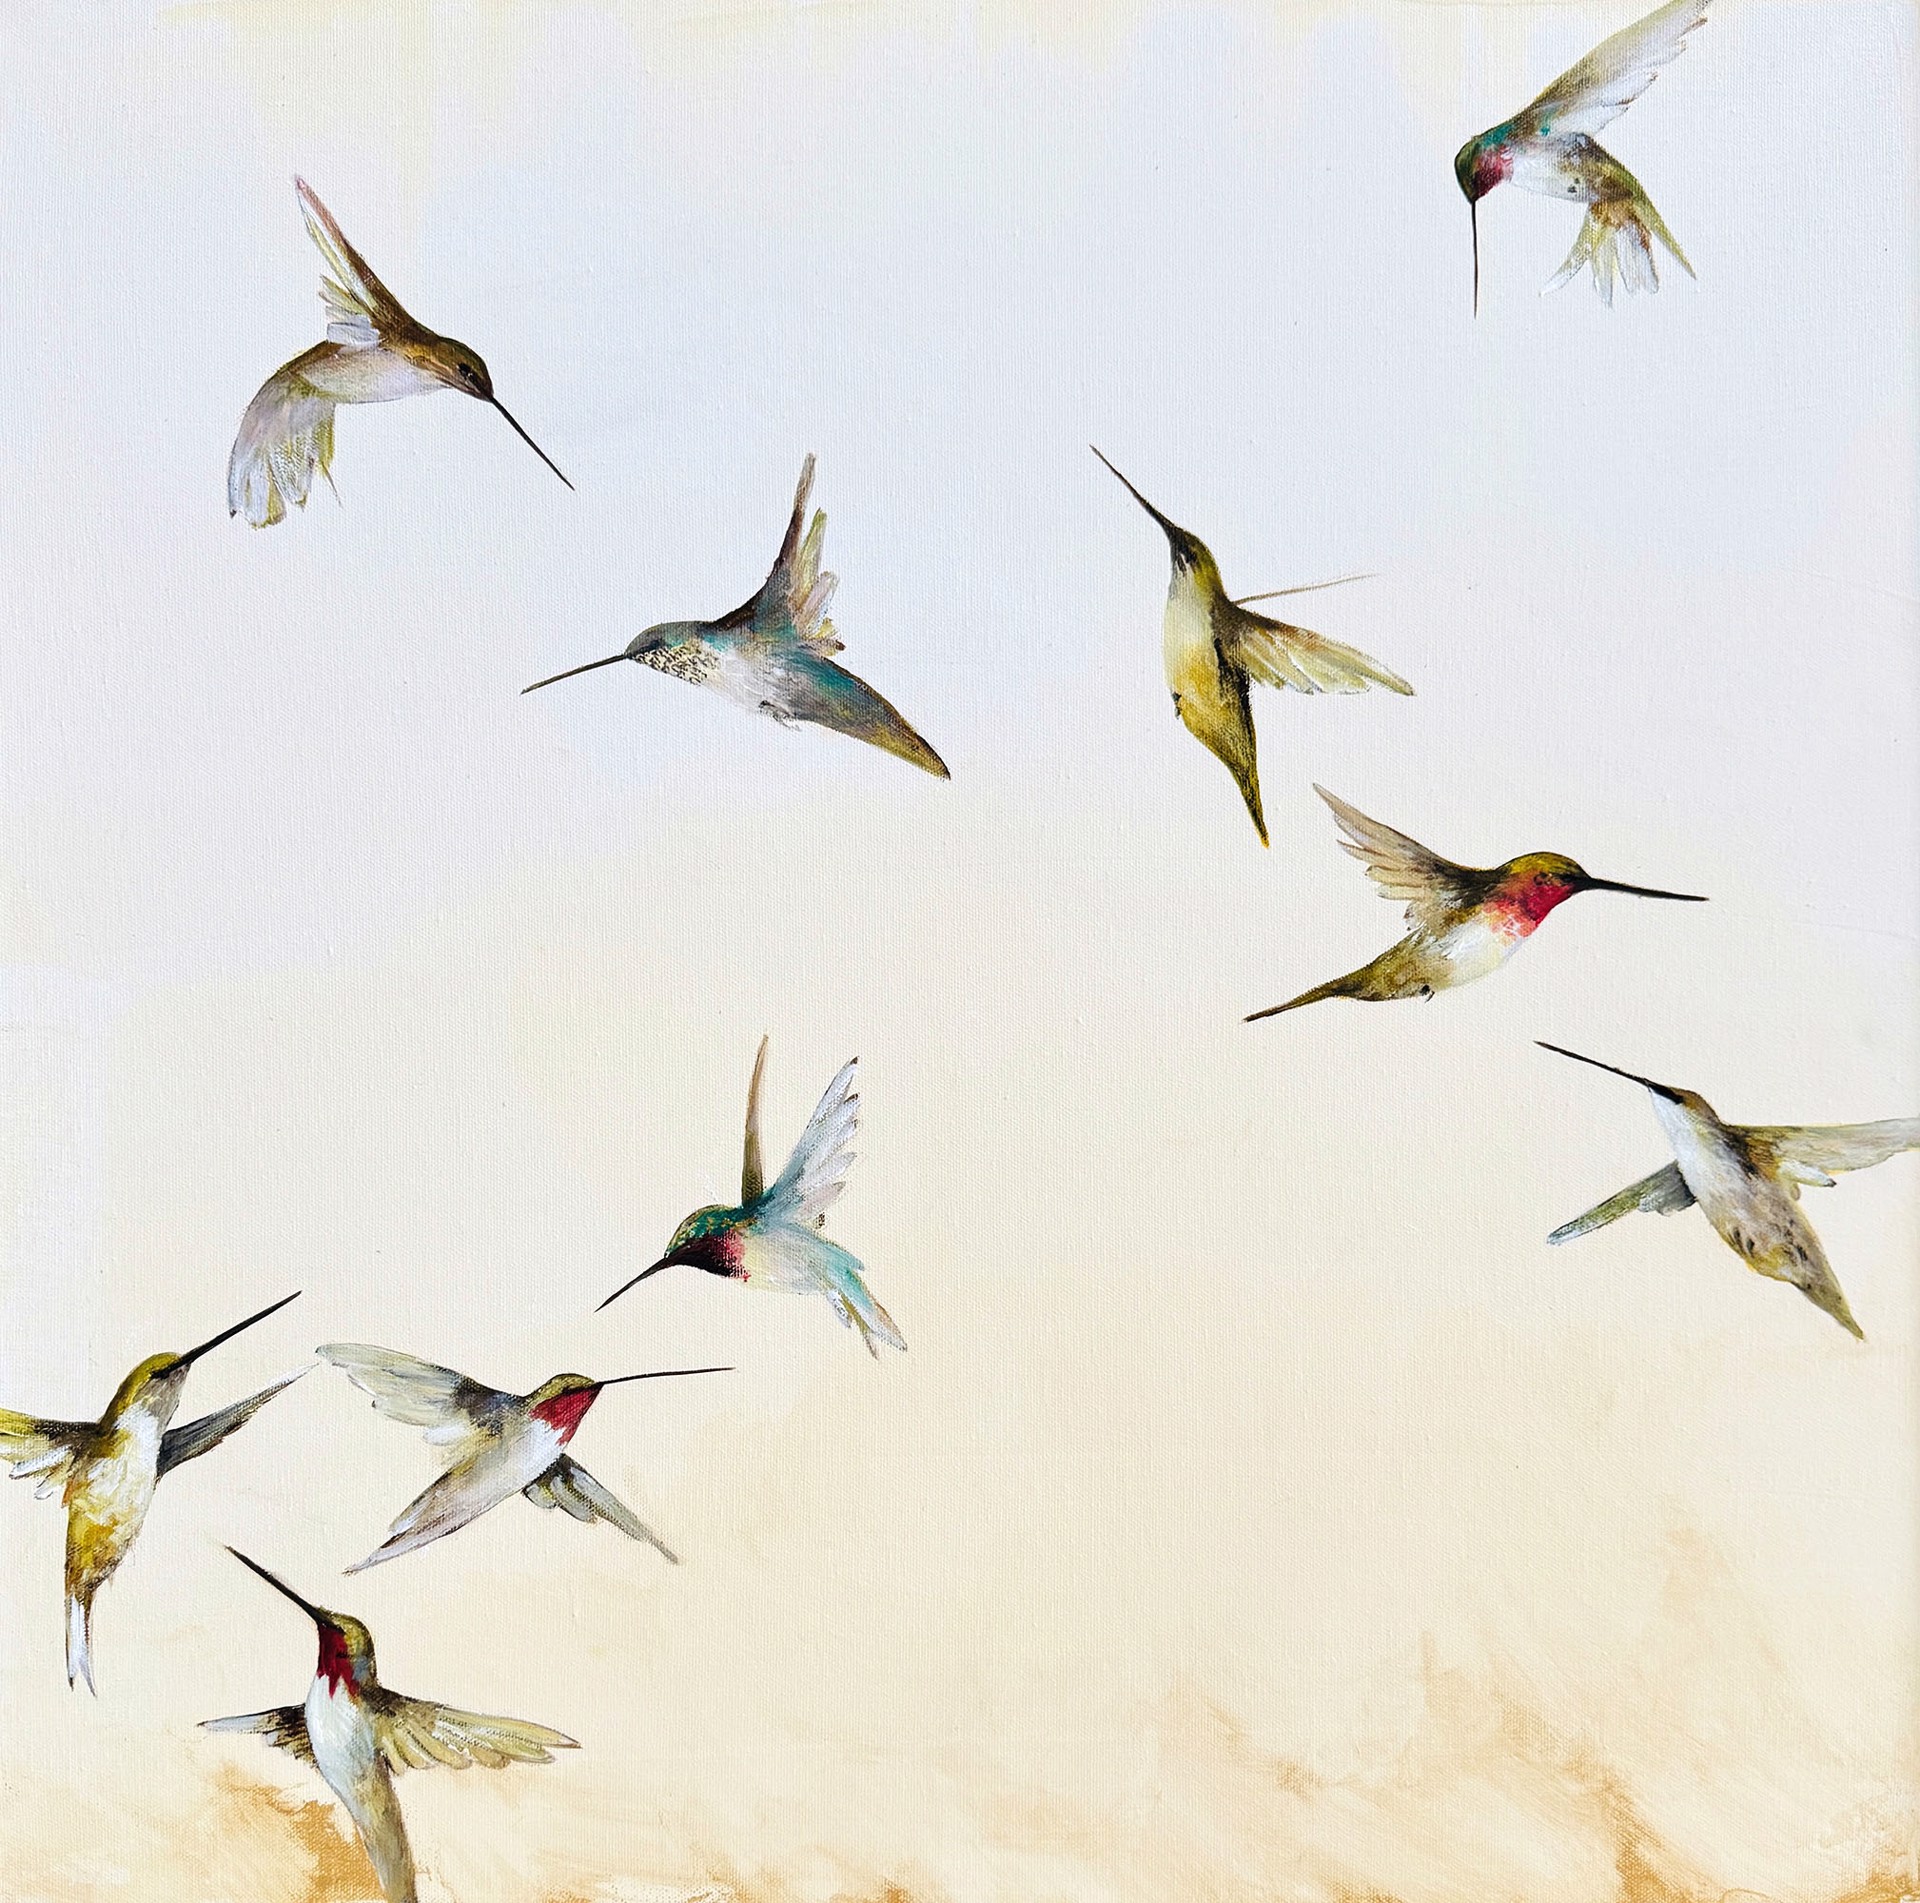 Original Oil Painting By Jenna Von Benedikt Featuring A Group Of Hummingbirds Flying Over Abstract Neutral Background